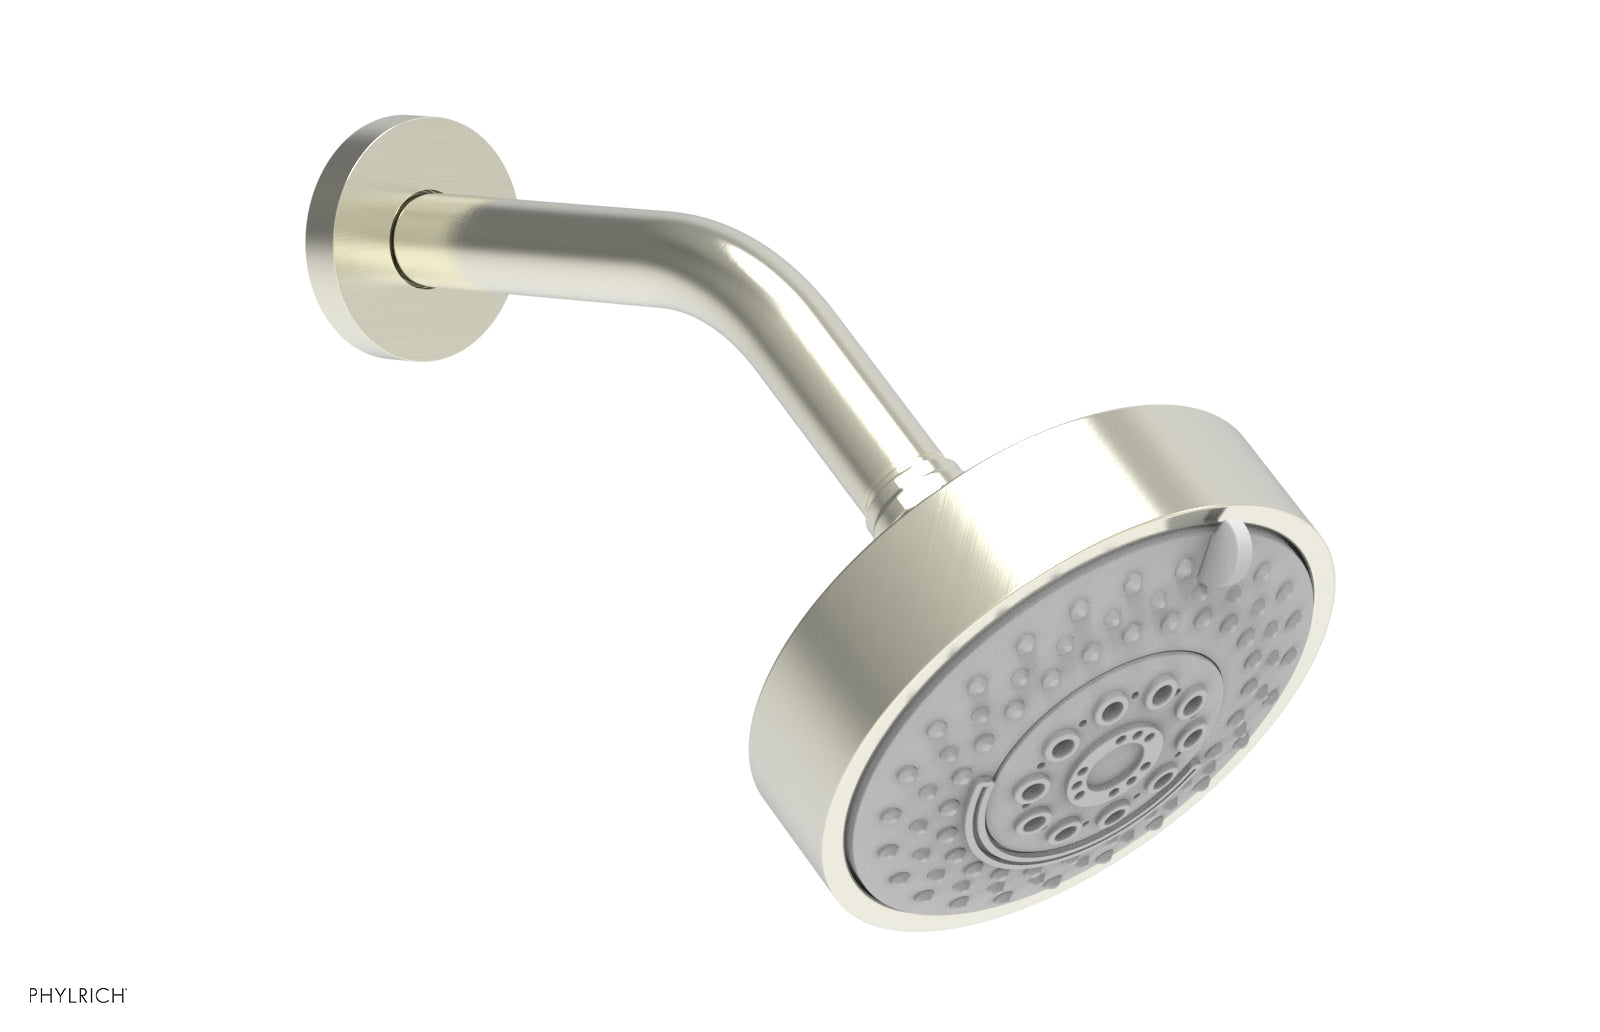 Phylrich 5" Contemporary Shower Head - 4 Functions